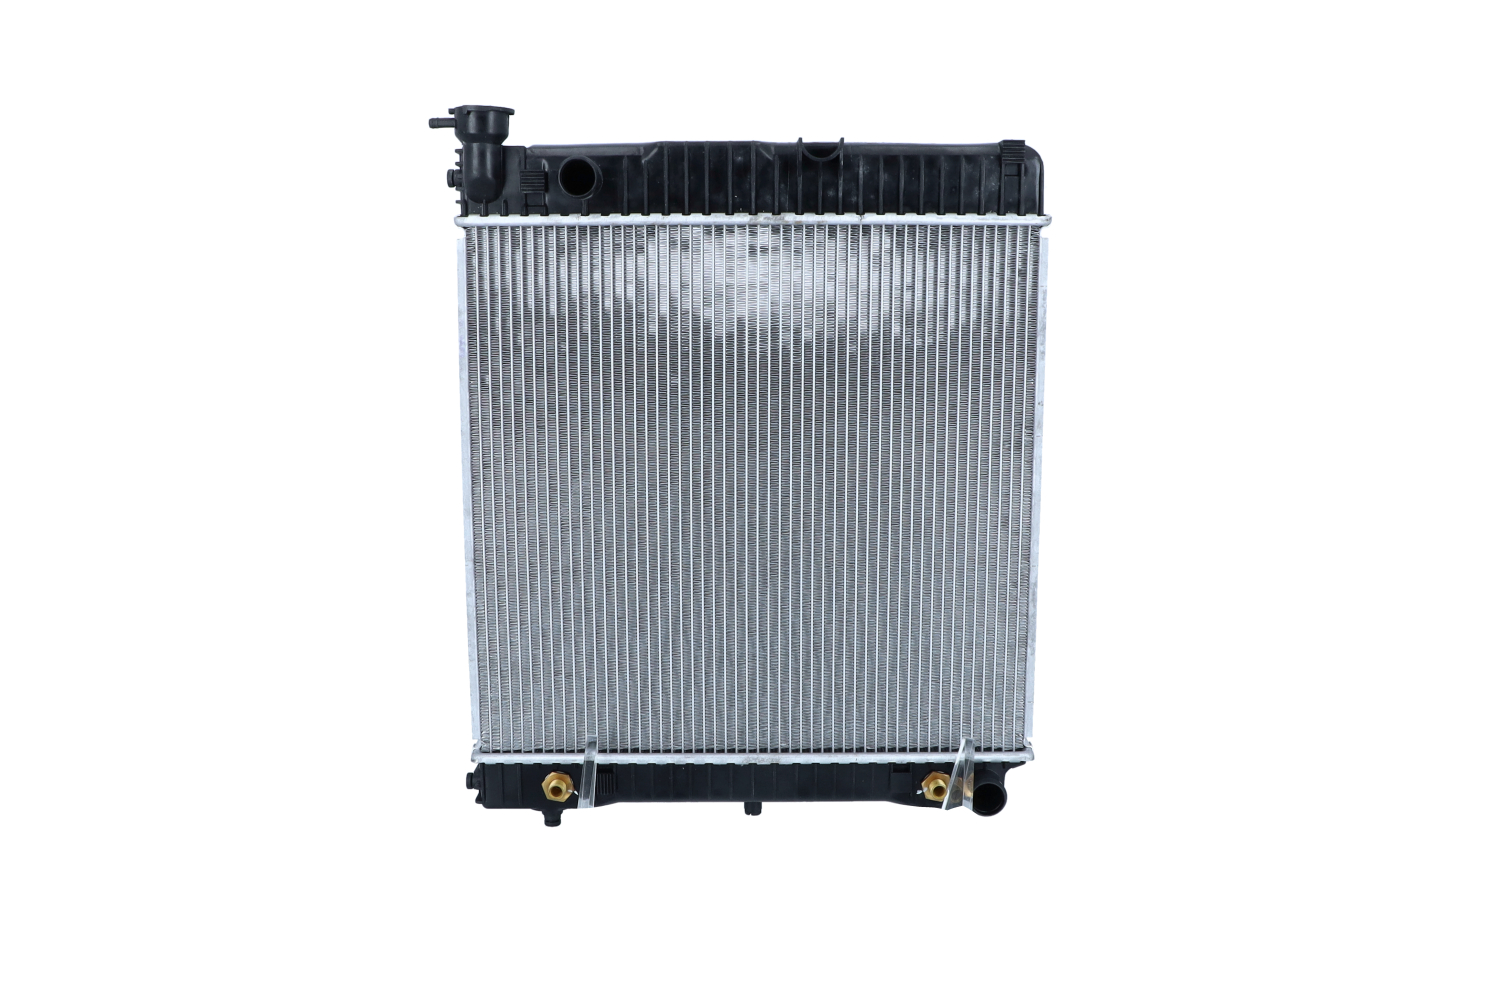 NRF 53875 Engine radiator Aluminium, 505 x 476 x 34 mm, with mounting parts, Brazed cooling fins